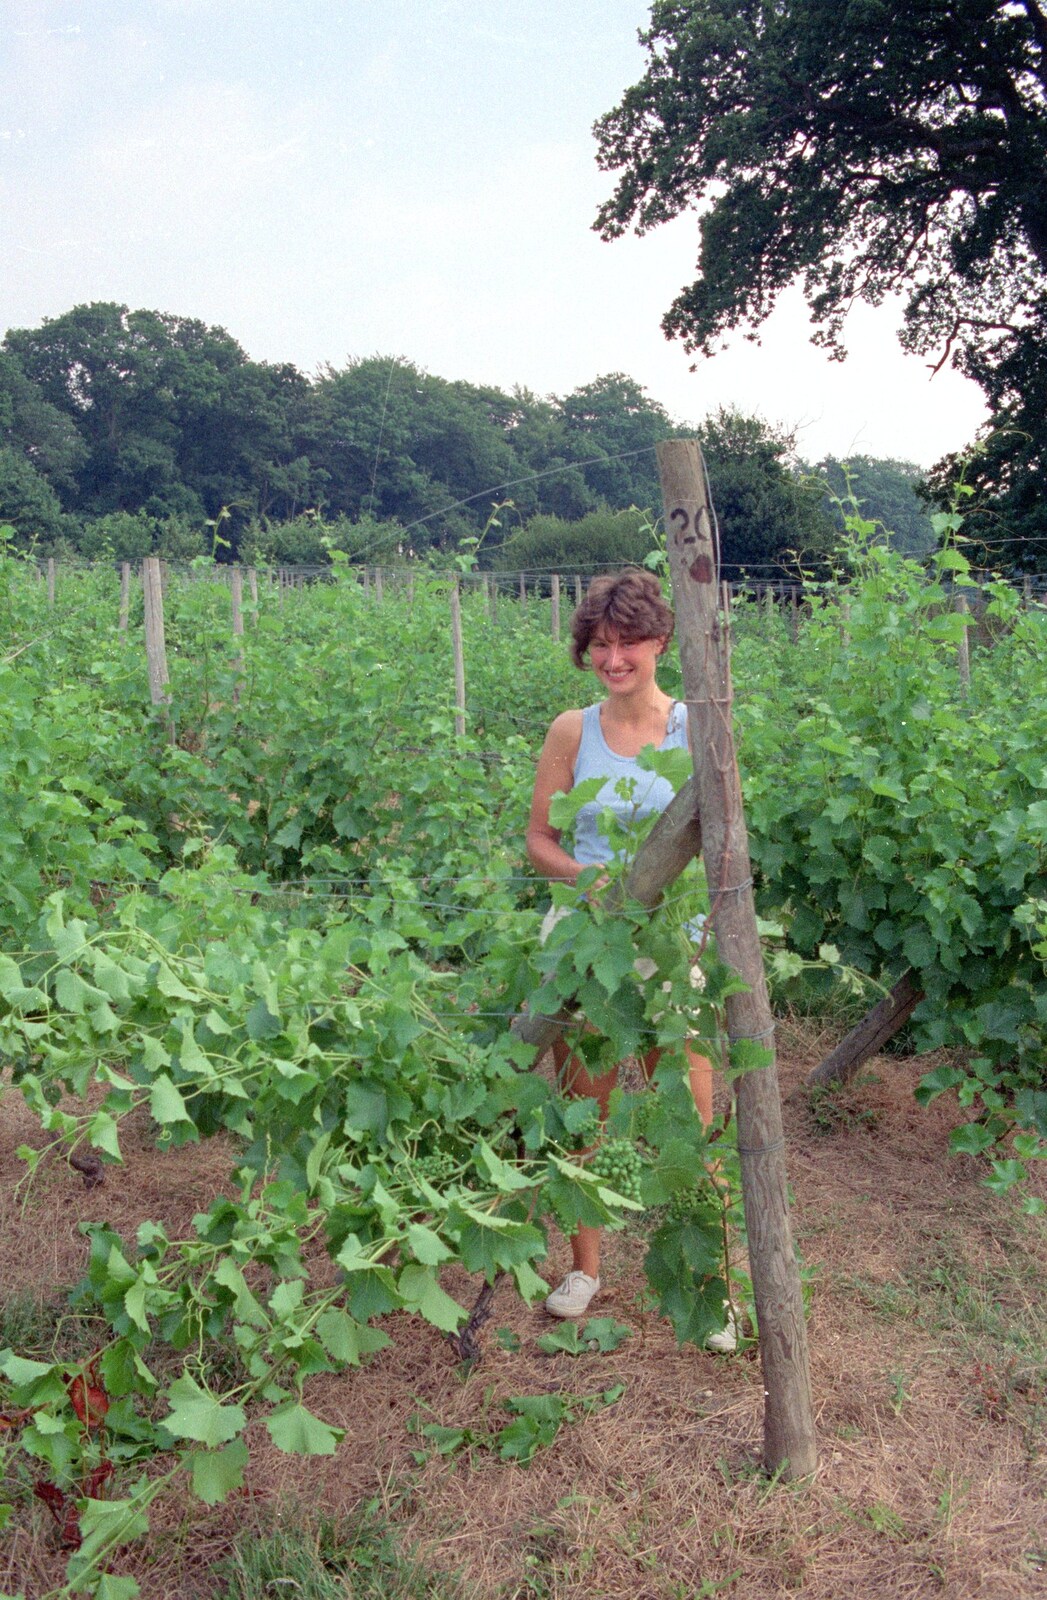 Angela mills around in amongst the vines from Back From Uni: Summer Pruning, Bransgore, Dorset - 25th July 1989